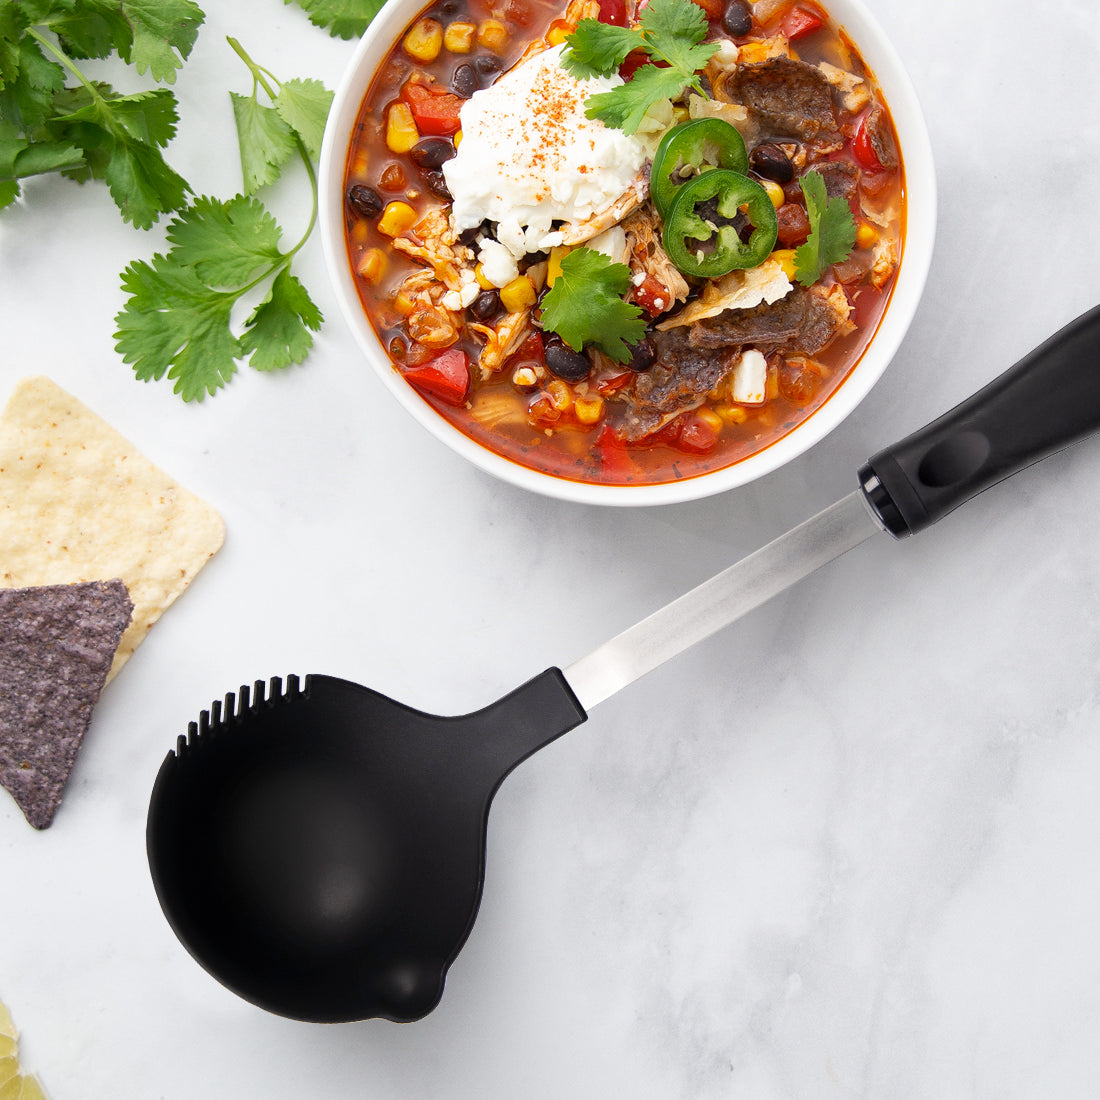 Non-scratch Rada Cutlery Ladle with chili, sour cream, chips, and jalapenos.